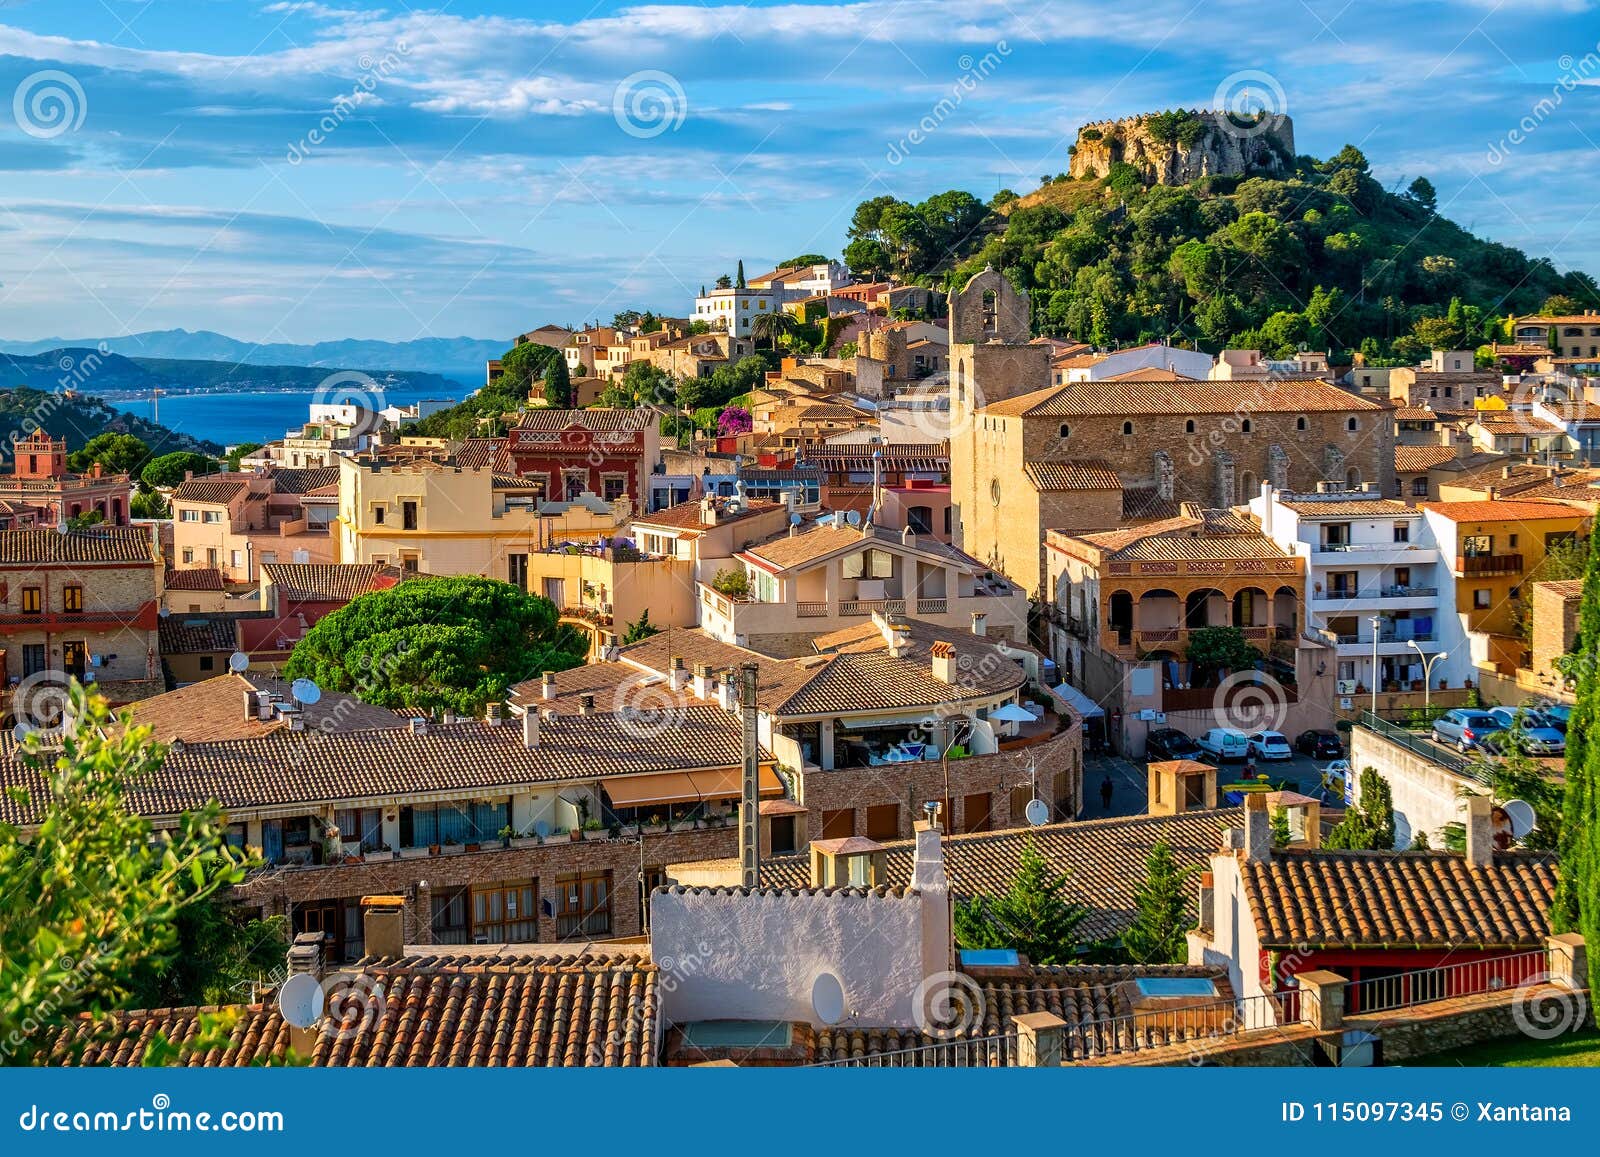 begur old town and castle, costa brava, catalonia, spain